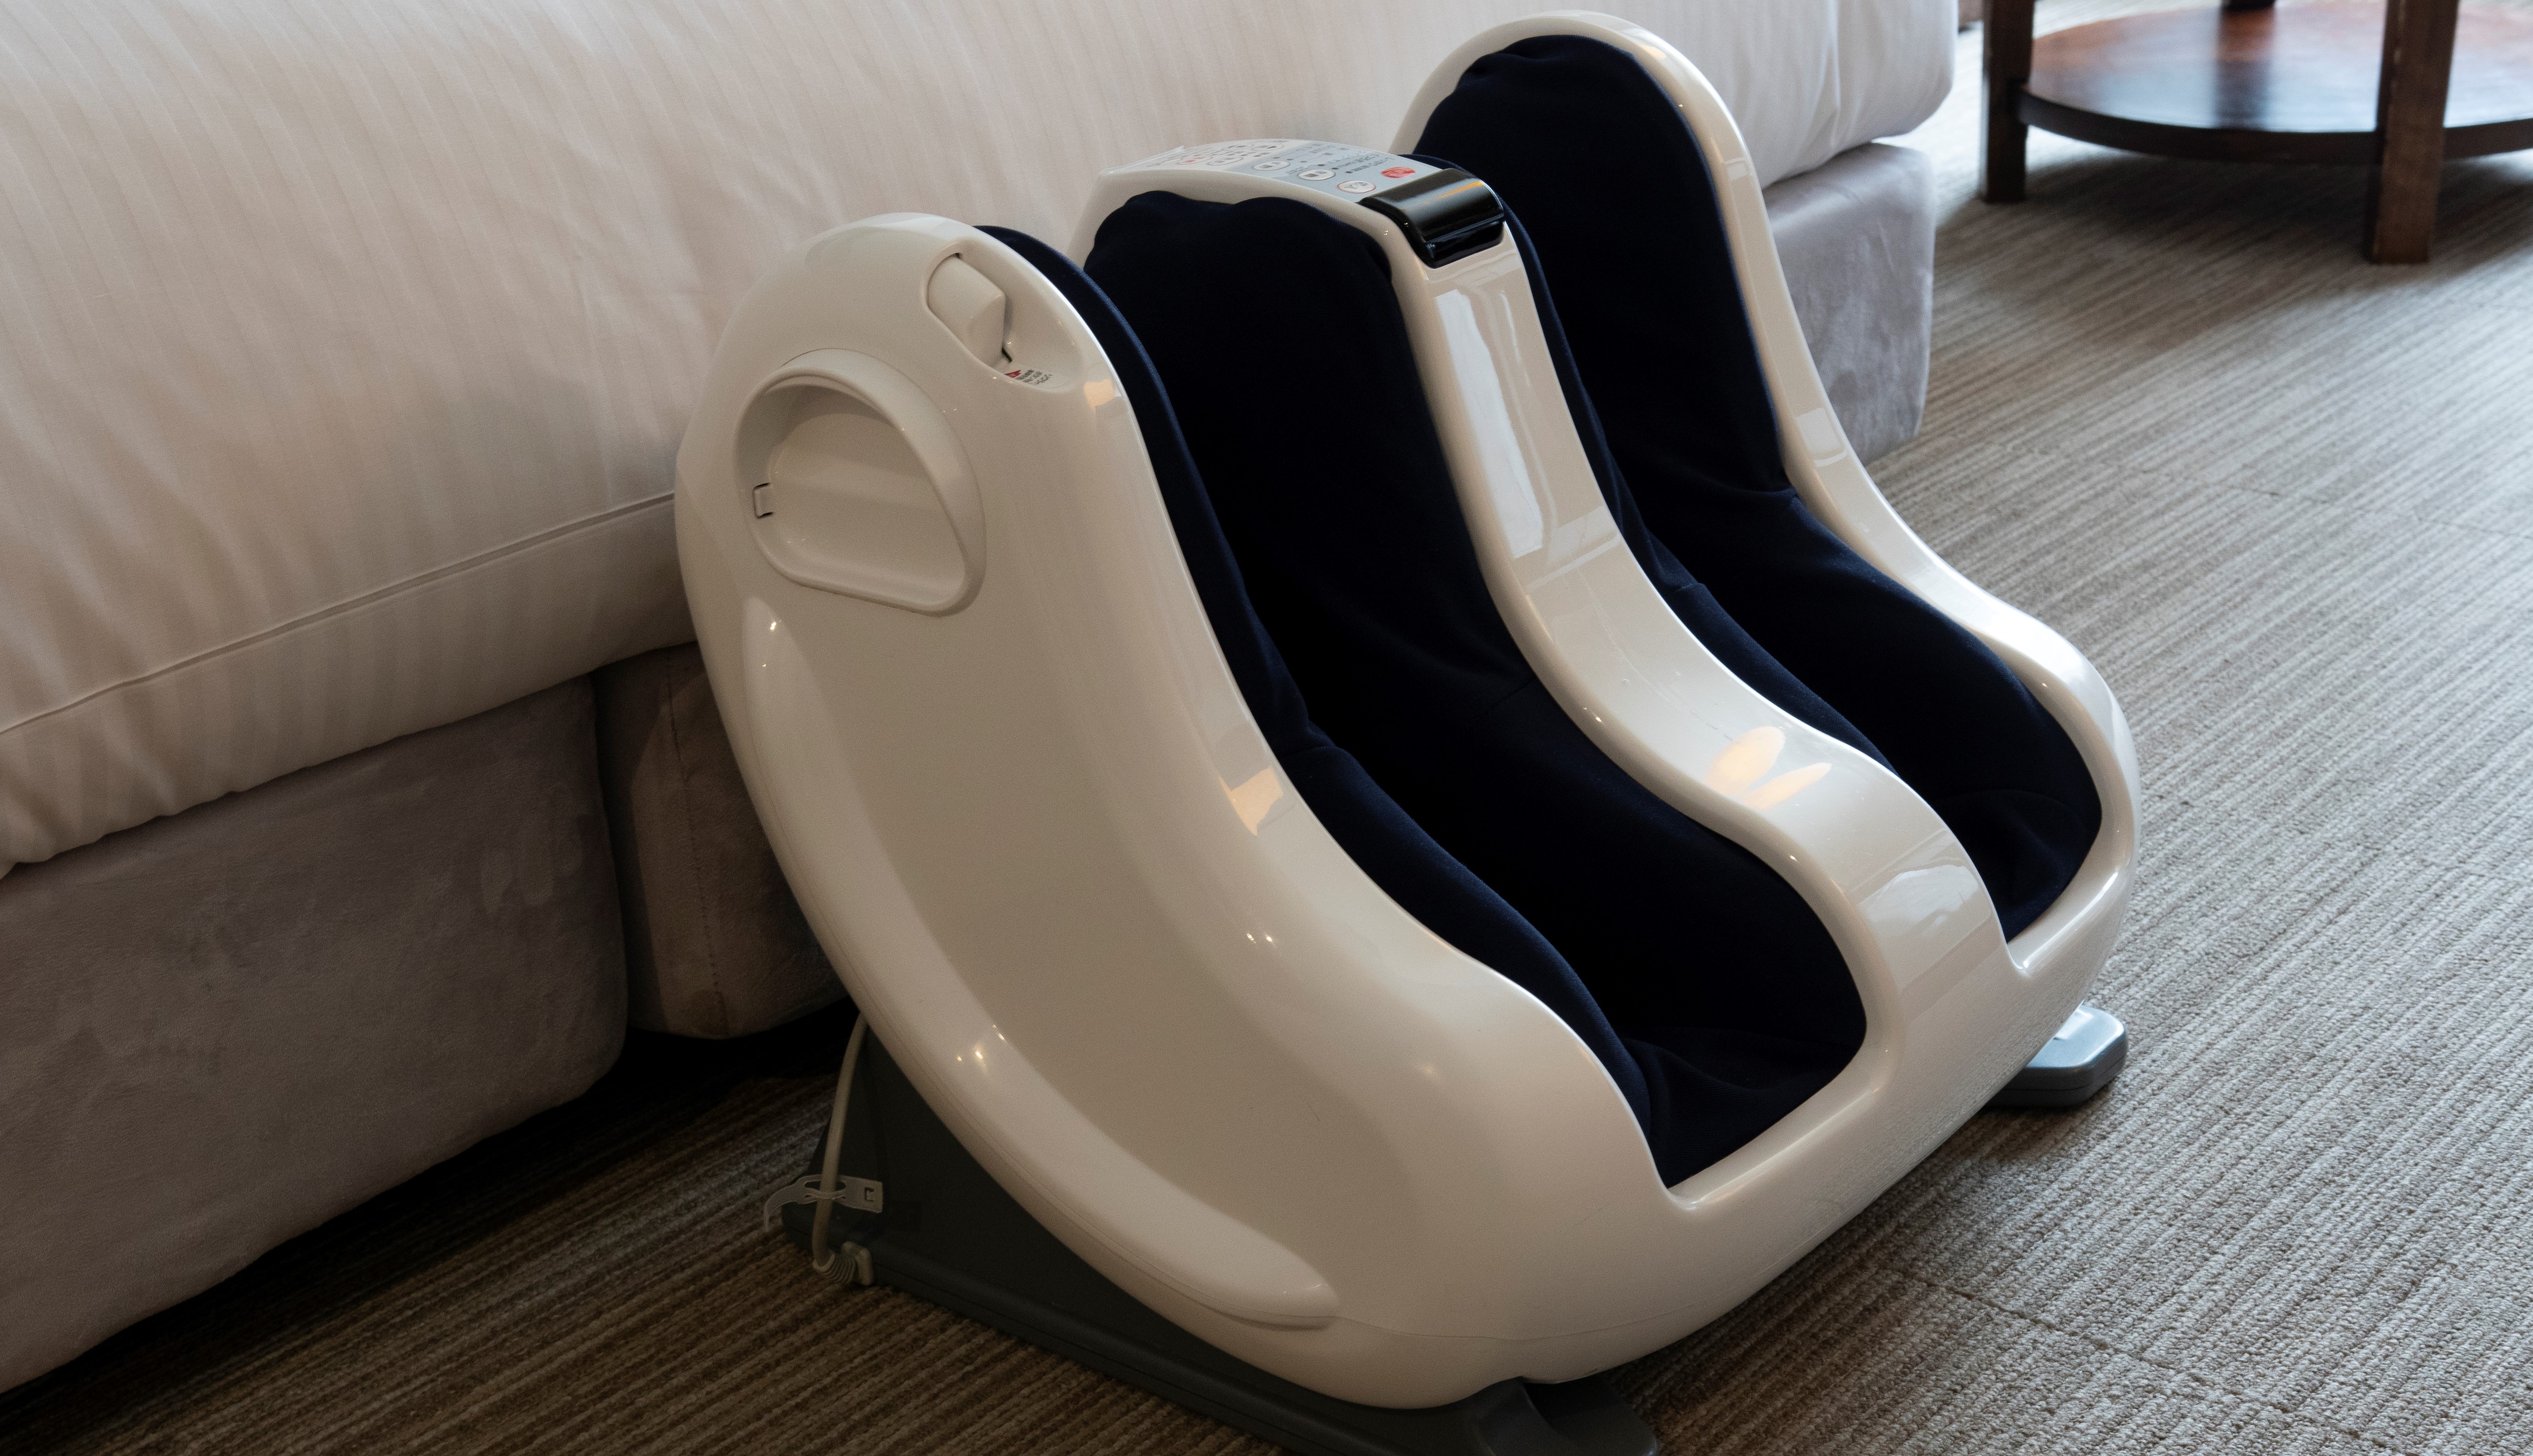 The special "foot massager" is installed in all rooms ♪ With air cushions, you can have a relaxing time ☆